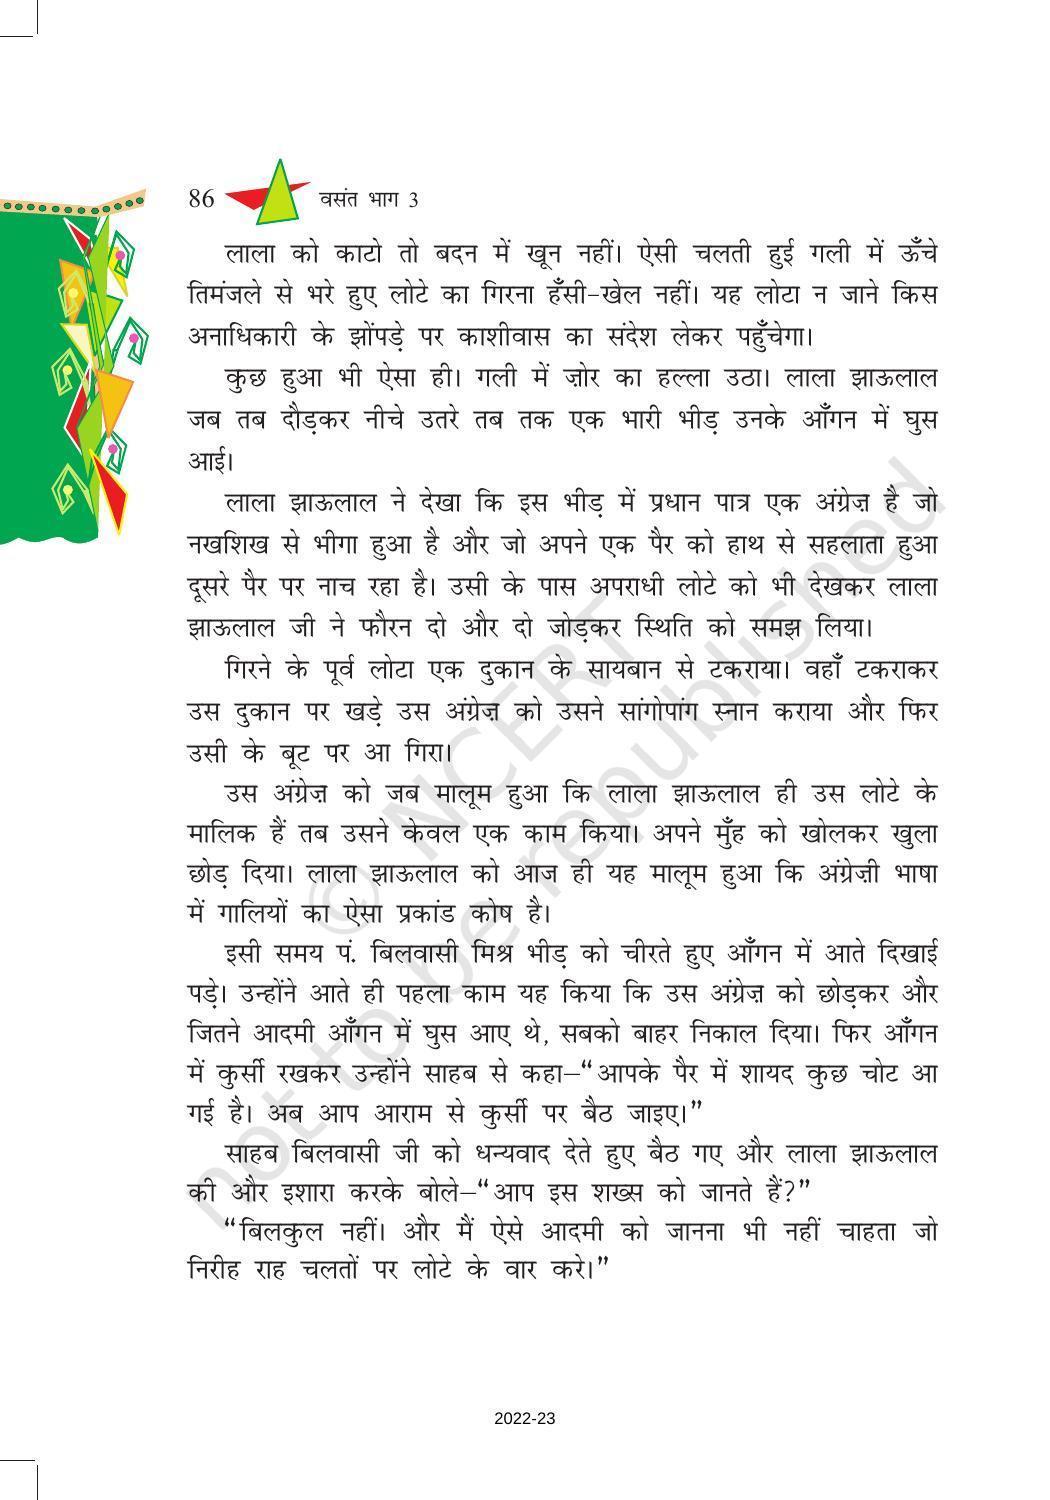 NCERT Book for Class 8 Hindi Vasant Chapter 14 अकबरी लोटा - Page 4